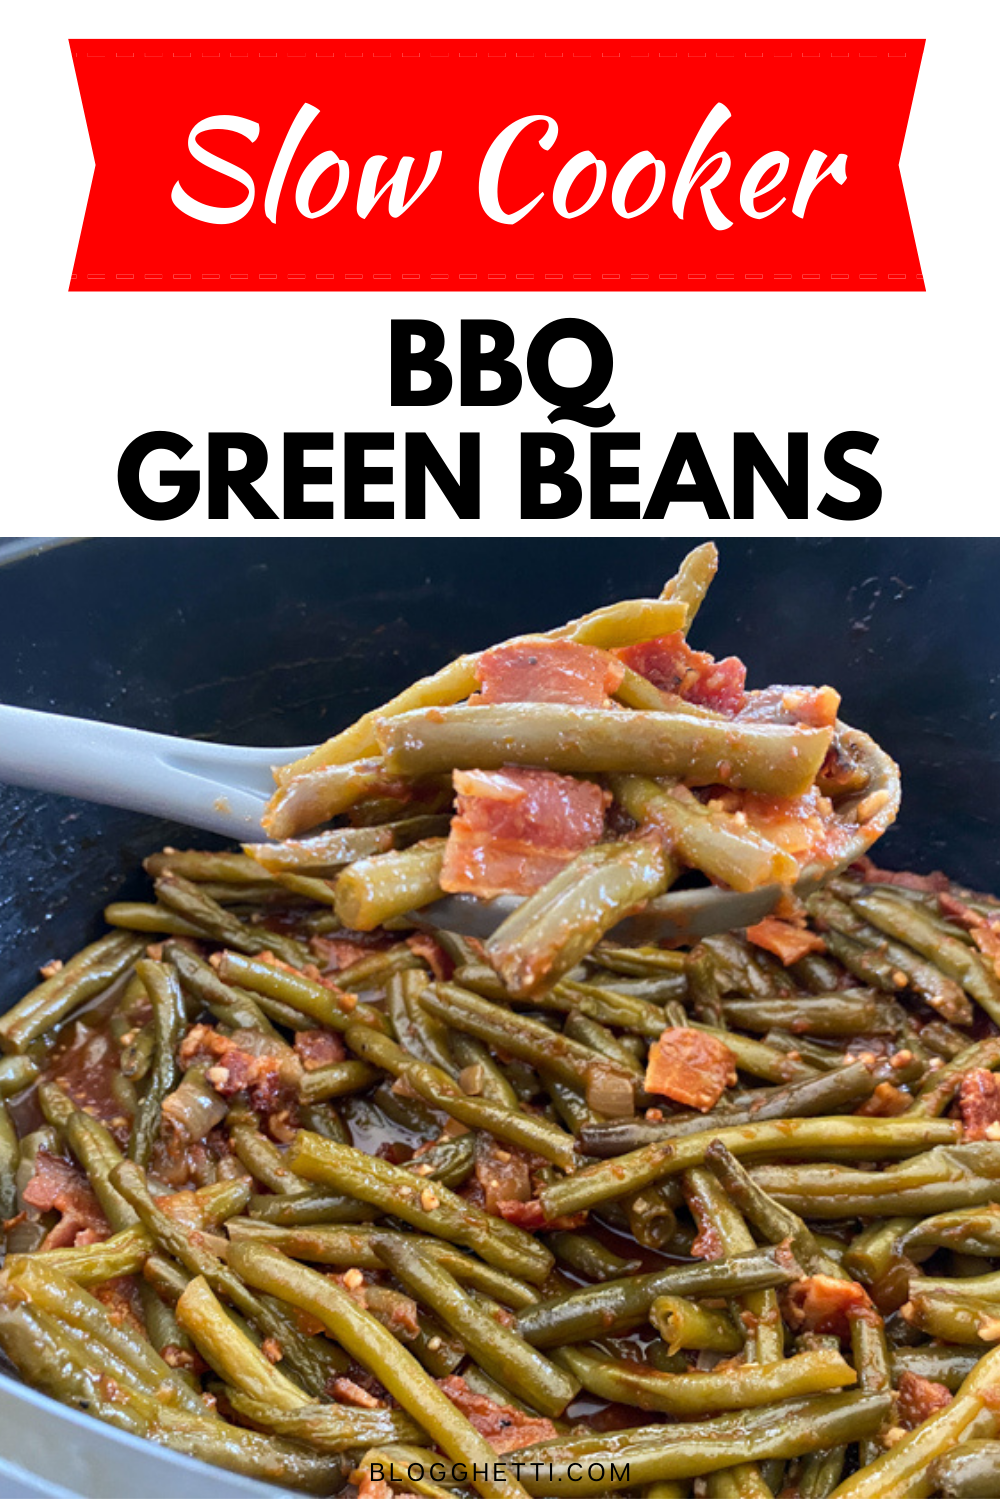 https://blogghetti.com/wp-content/uploads/2021/05/slow-cooker-bbq-green-beans-with-text-overlay.png